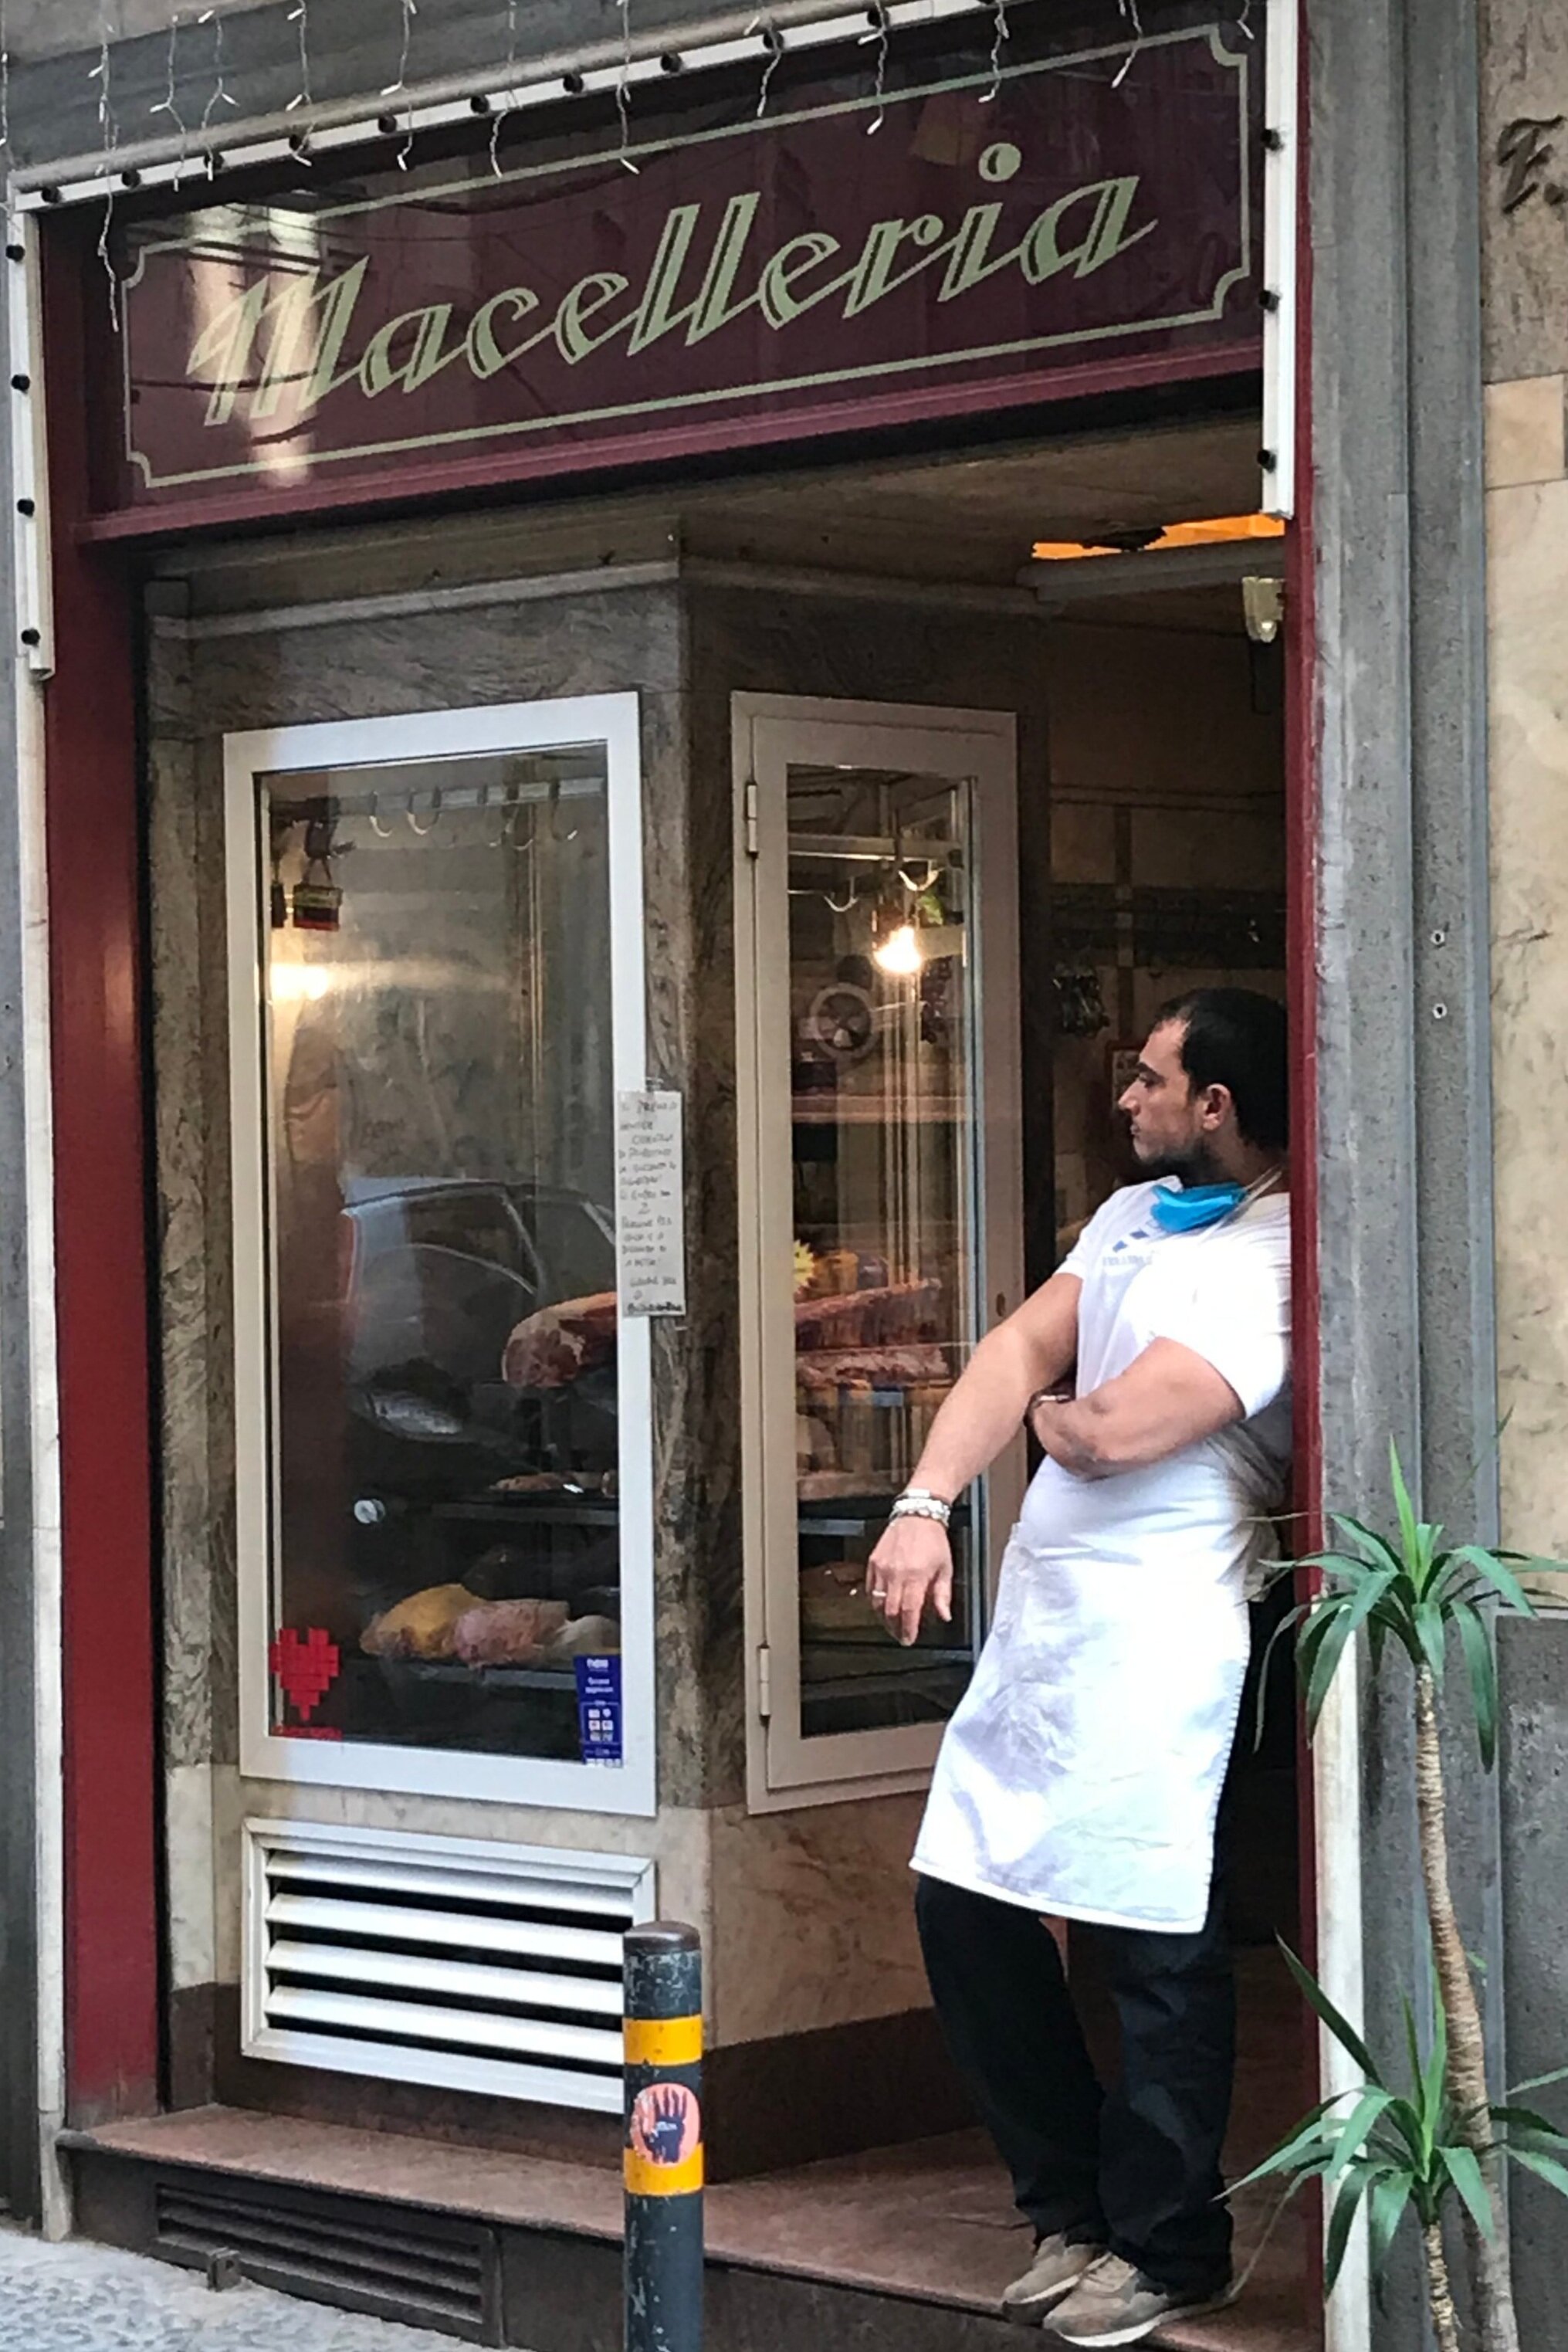   PICTURED:  A  maceliere  or butcher, enjoys a cigarette on a warm morning after finishing preparations for the day.  